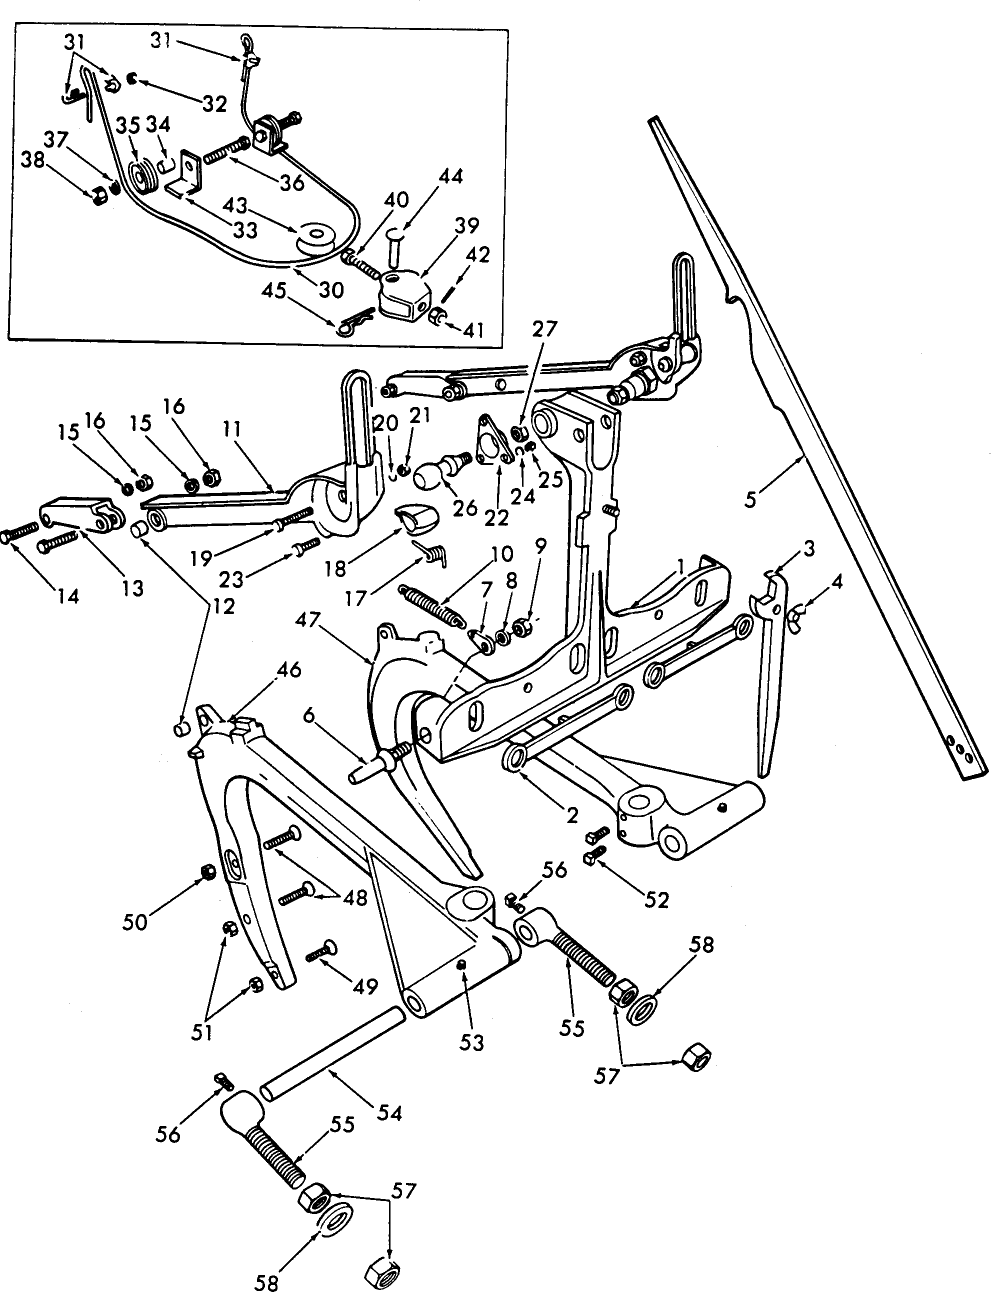 012 FRAME ASSEMBLY, FOR TWO WAY PLOW - 10-82 FOR 10-198